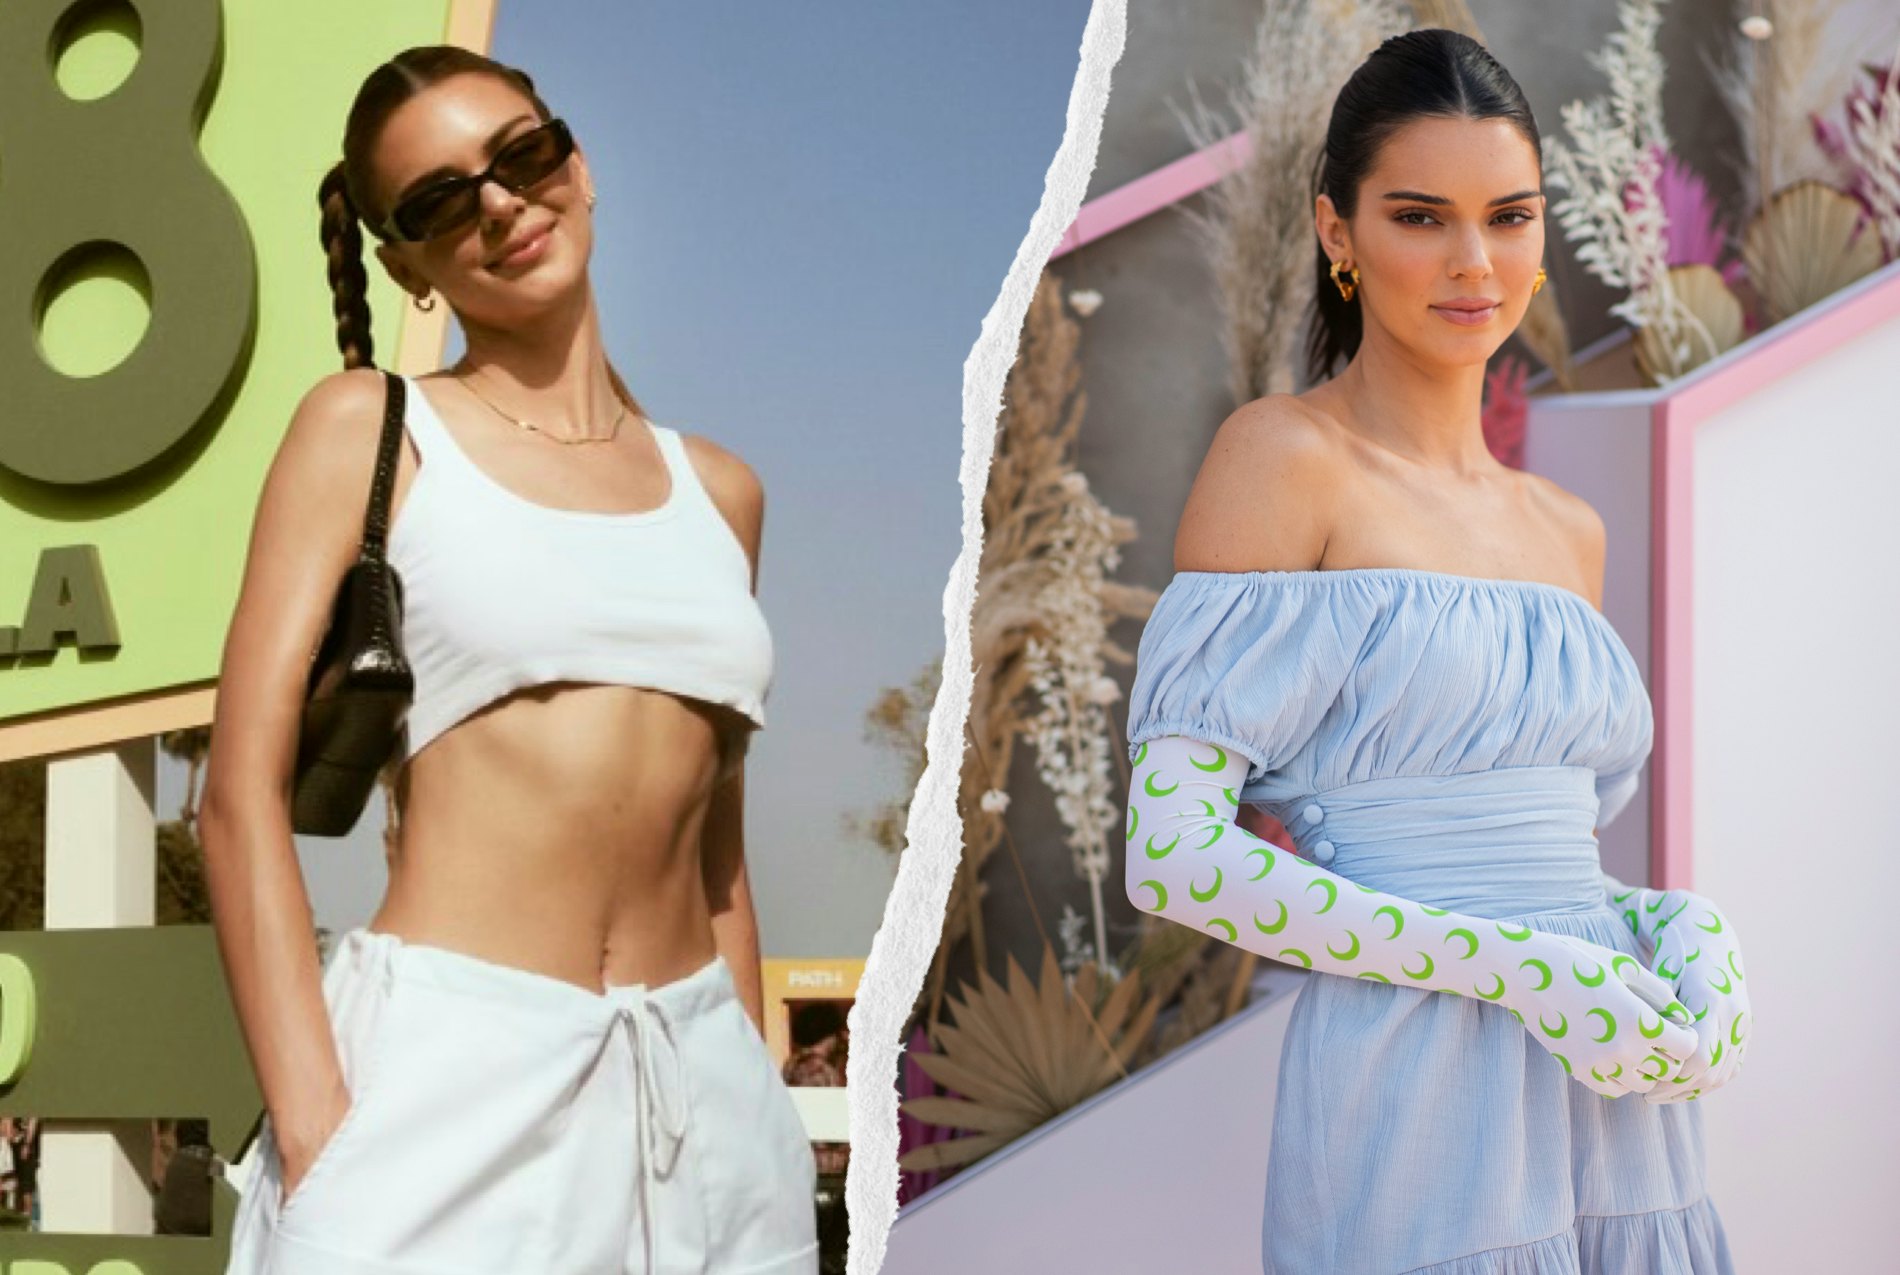 Kendall Jenner and I Agree: These Are the Most Flattering Black